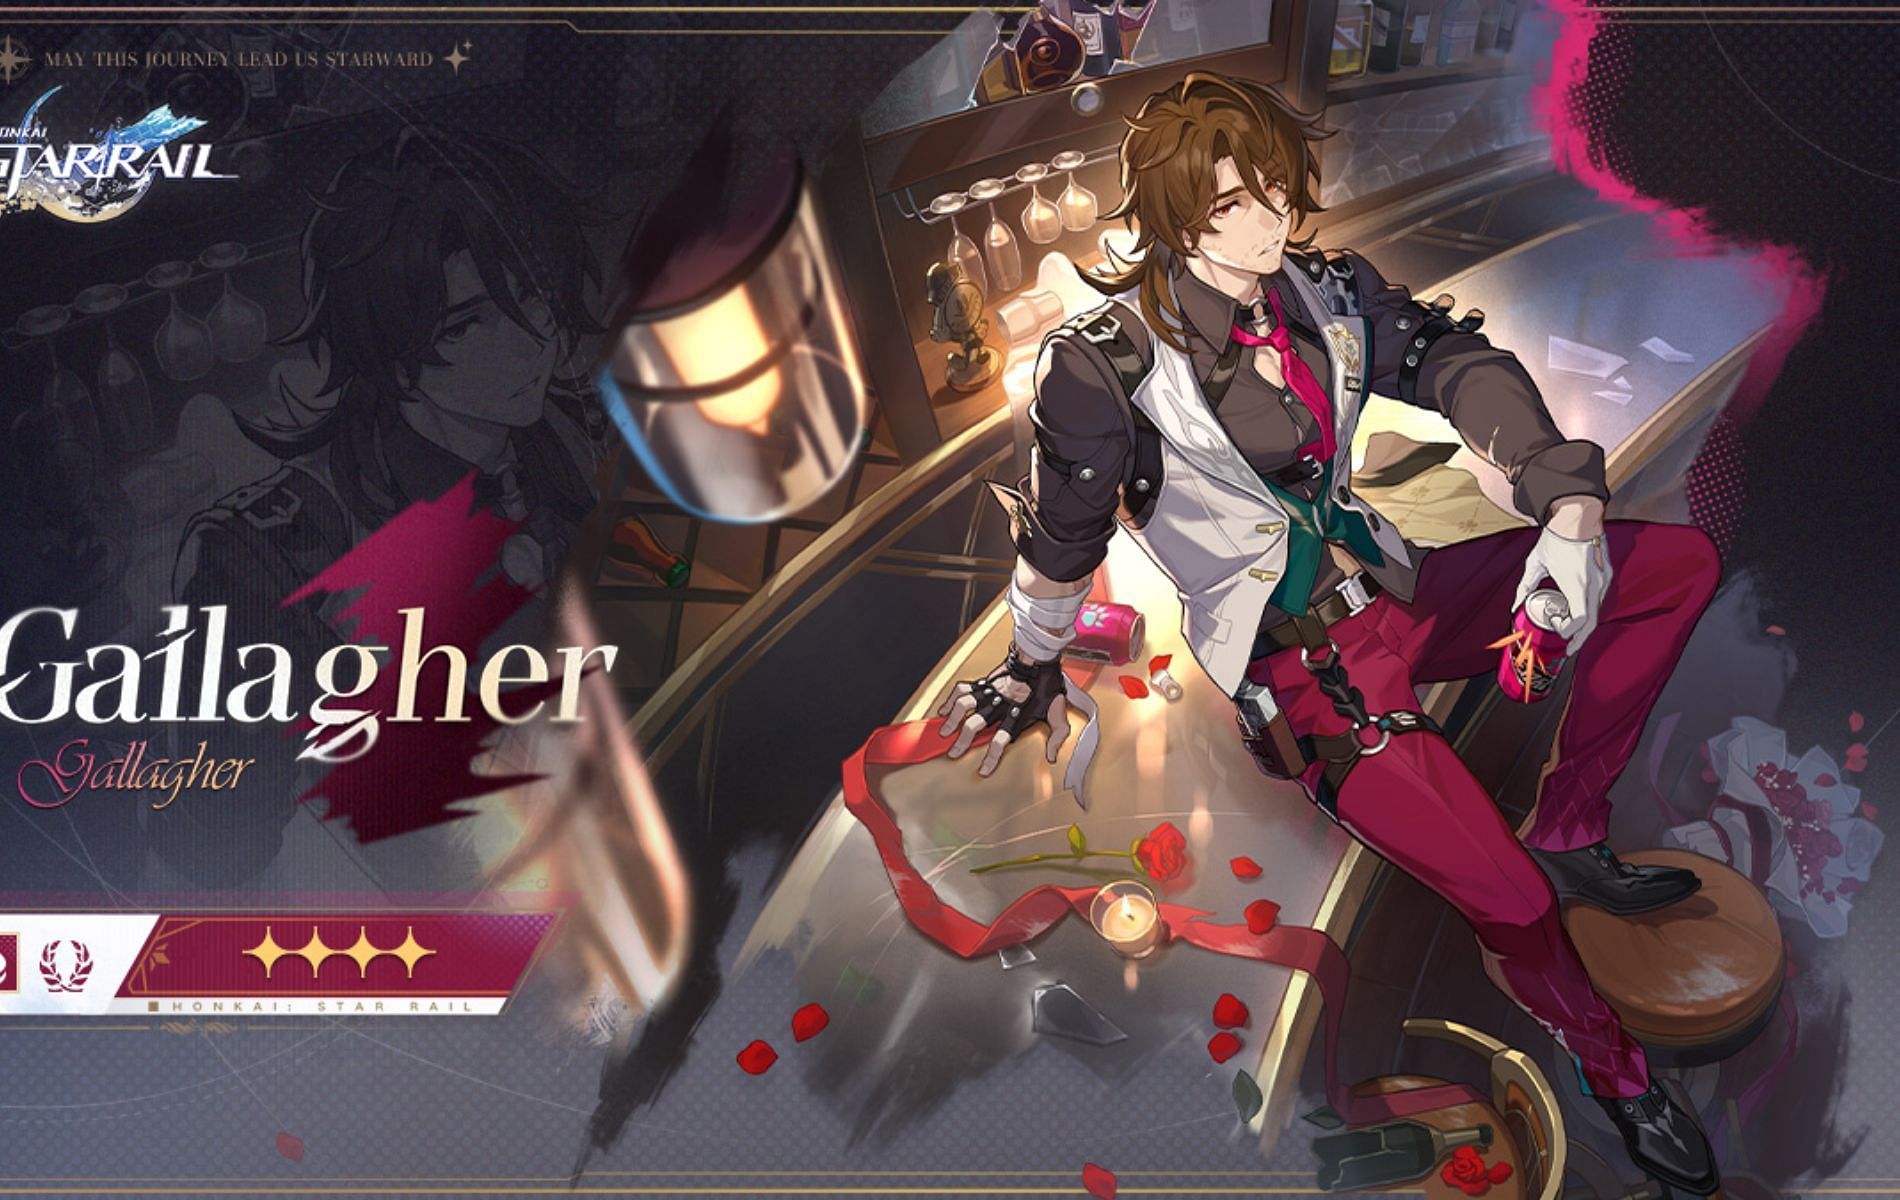 Honkai Star Rail 2.1 will feature Gallagher as the new Abundance character